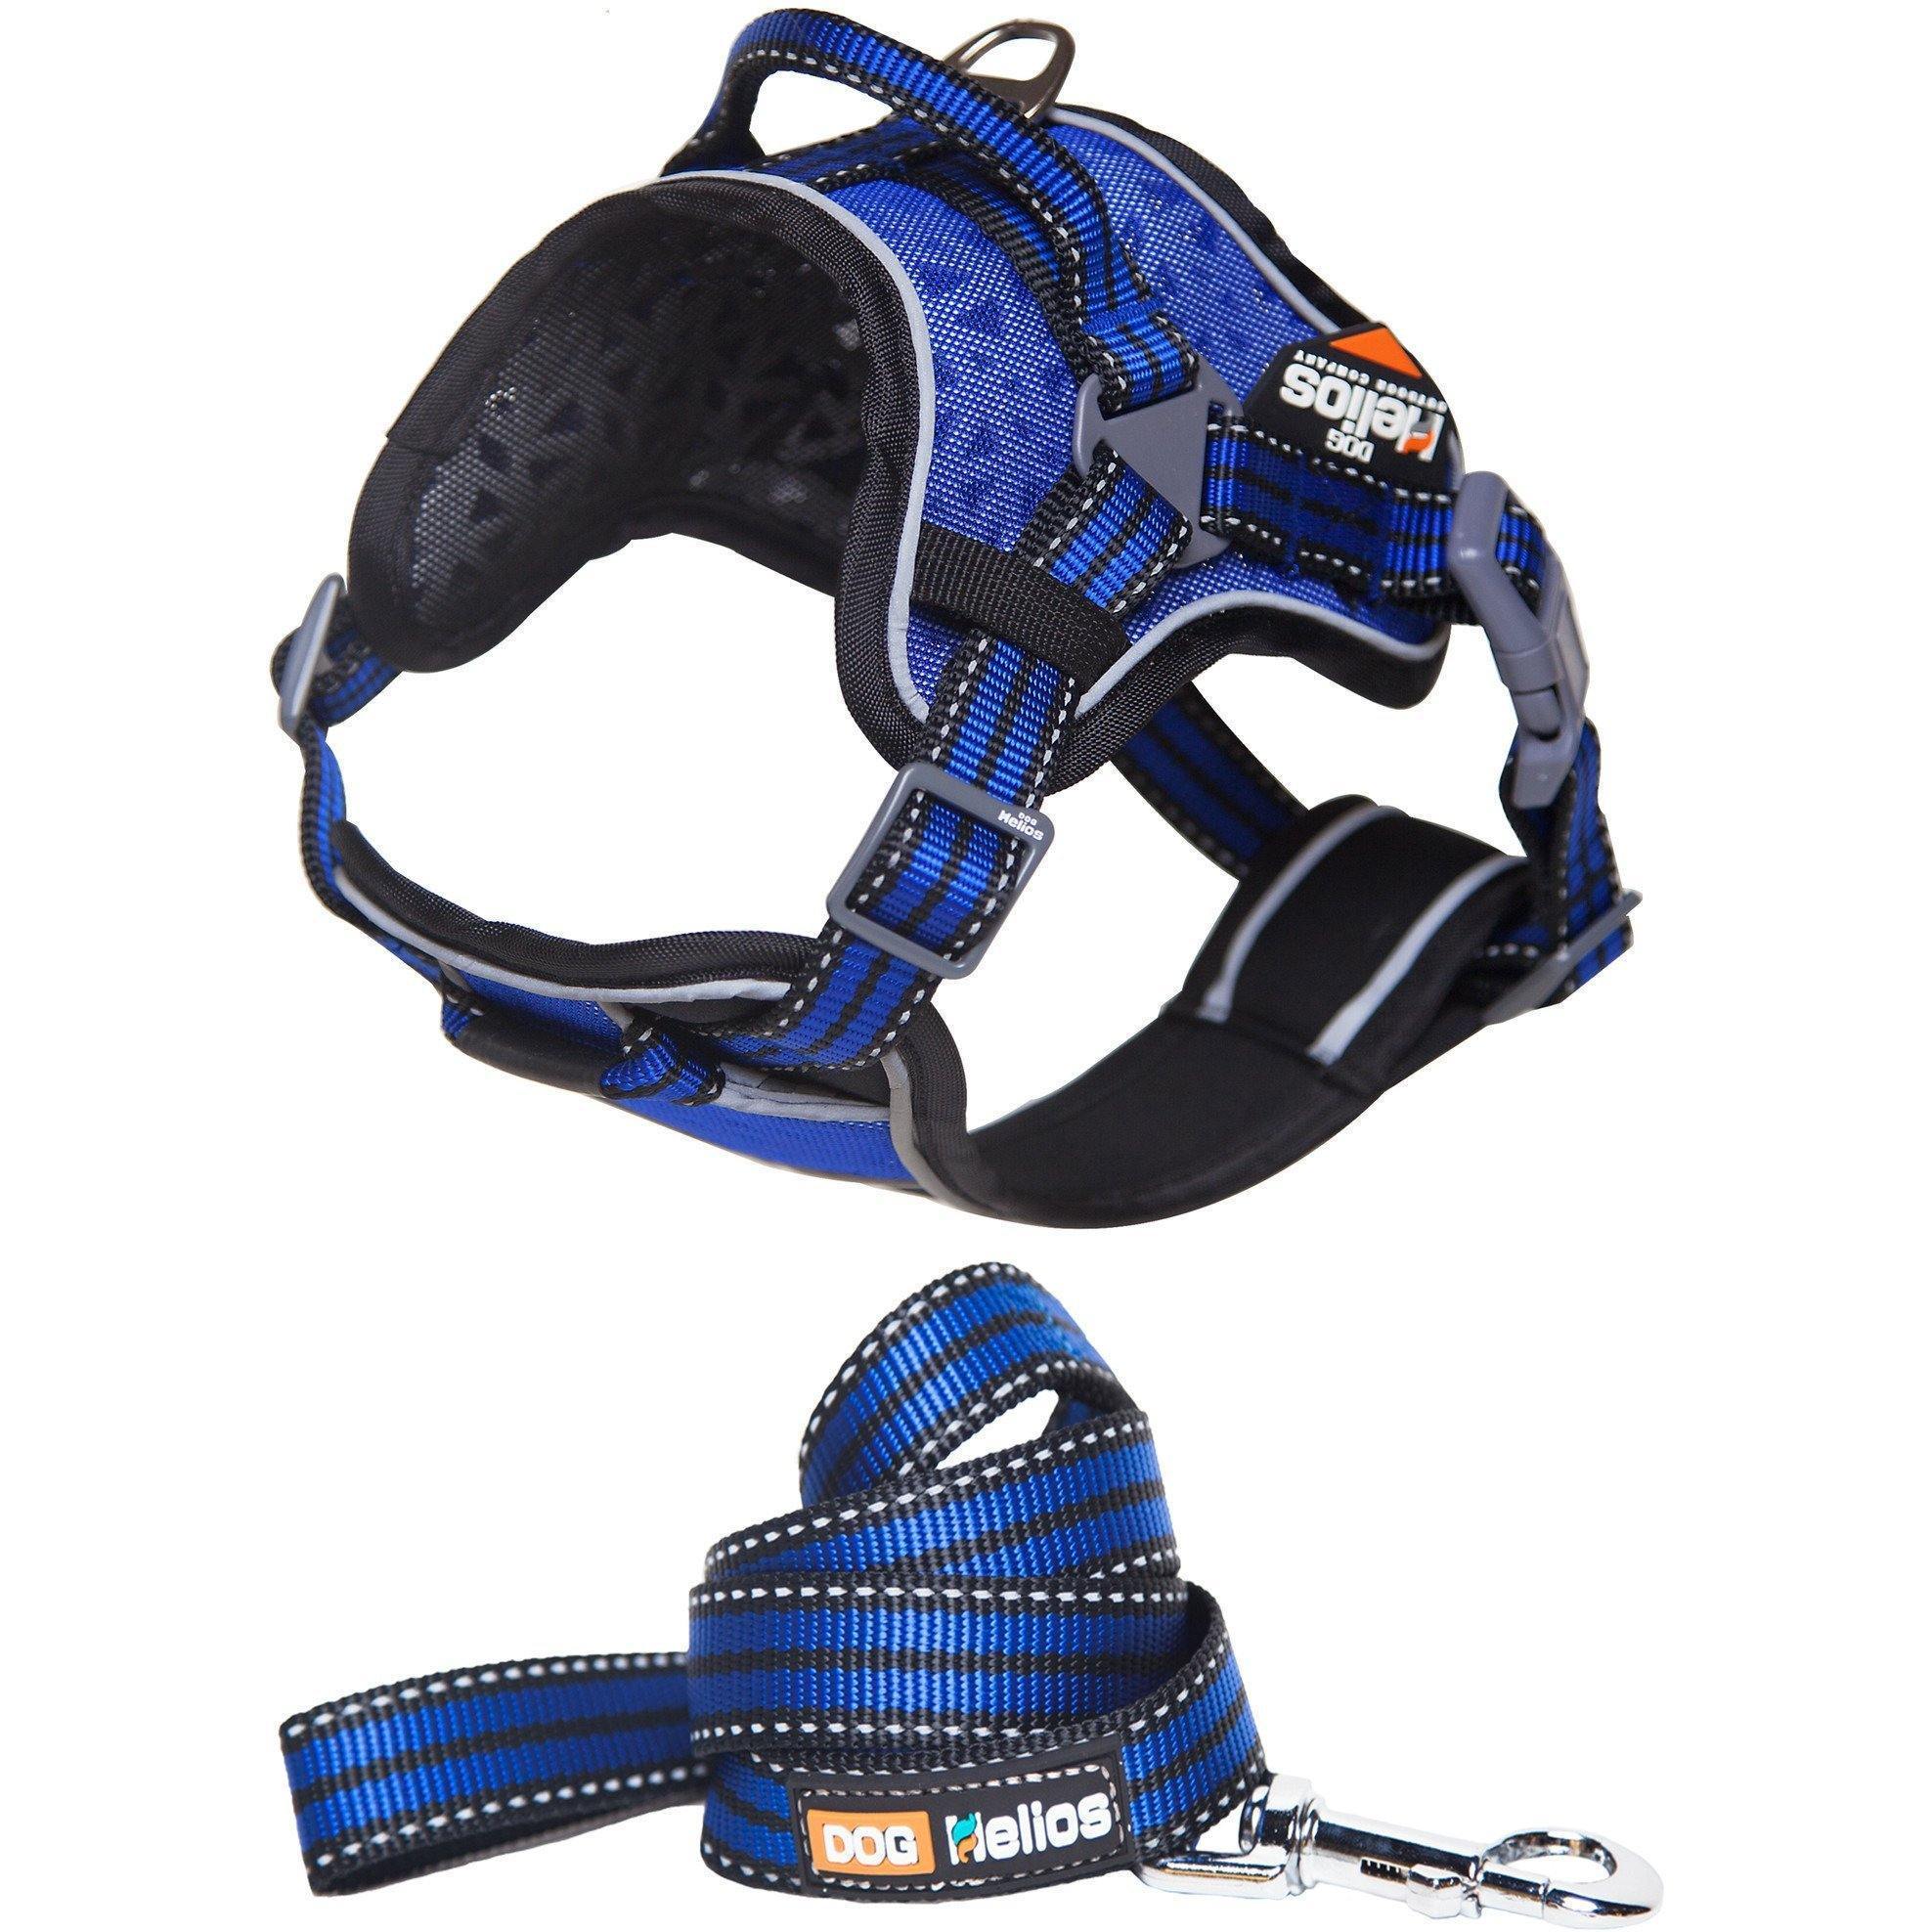 Dog Helios ® 'Journey Wander' Chest Compressive Sporty Adjustable Dog Harness and Leash Small Blue